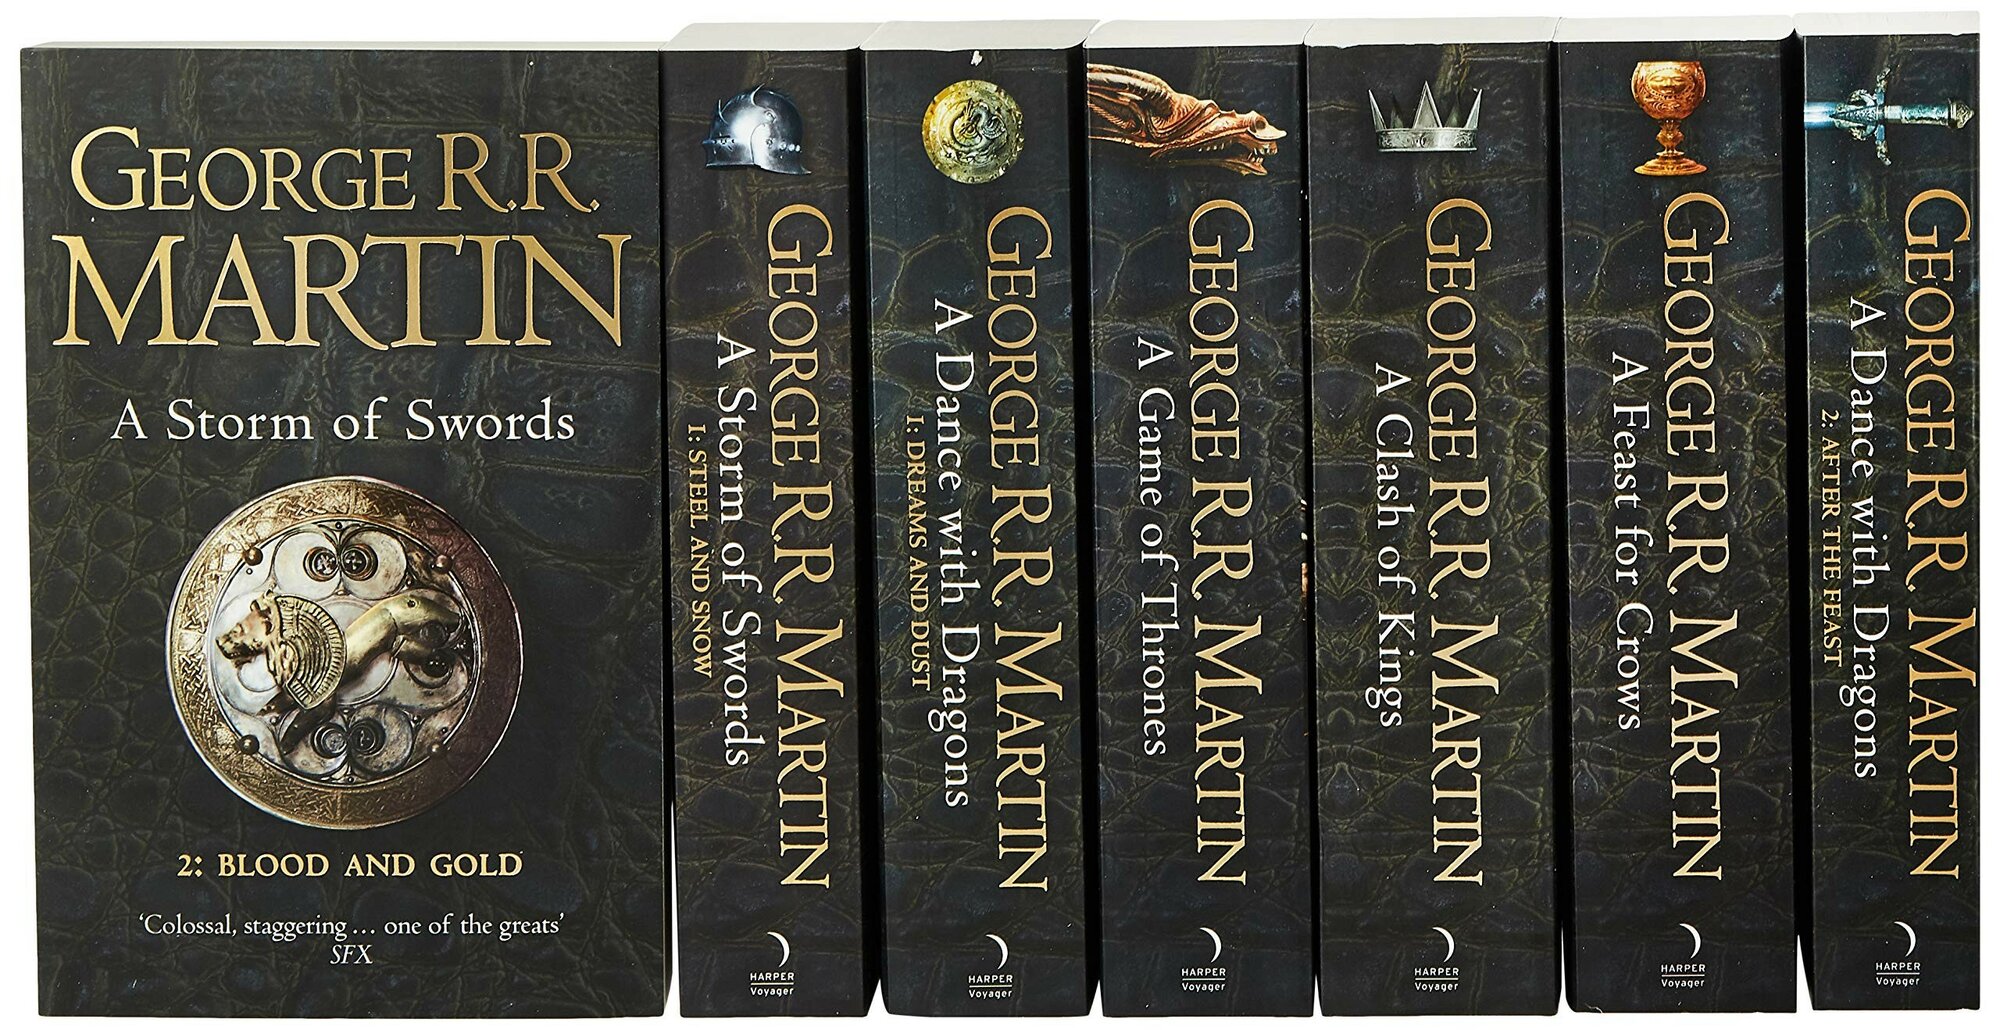 Martin George R. "Game of Thrones: The Story Continues( Box)"